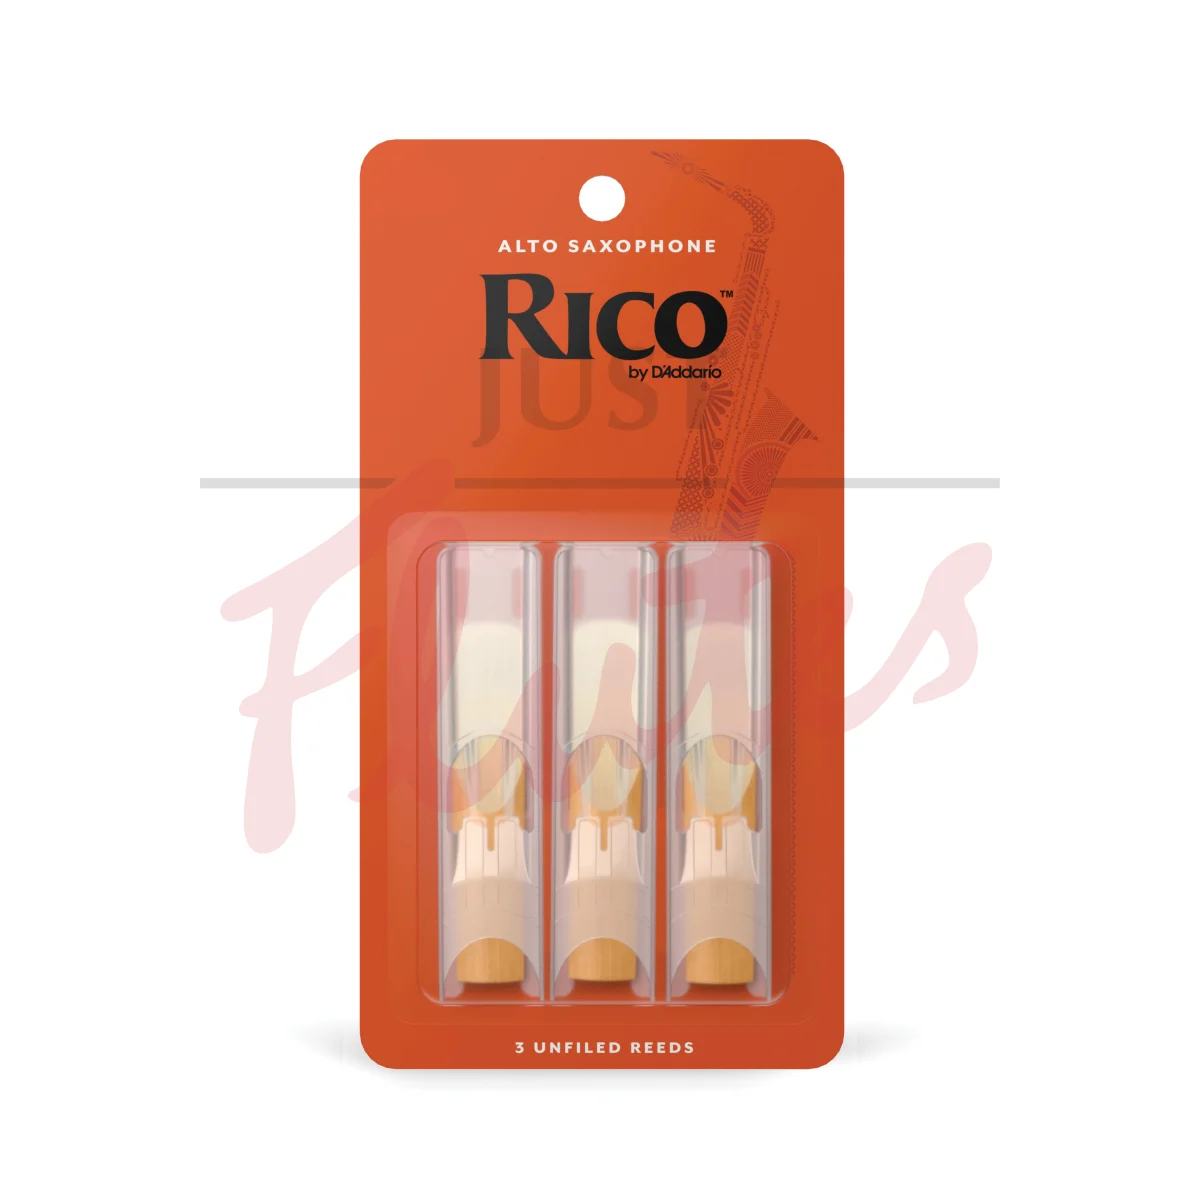 Rico by D'Addario RJA0315 Alto Saxophone Reeds, Strength 1.5, Pack of 3